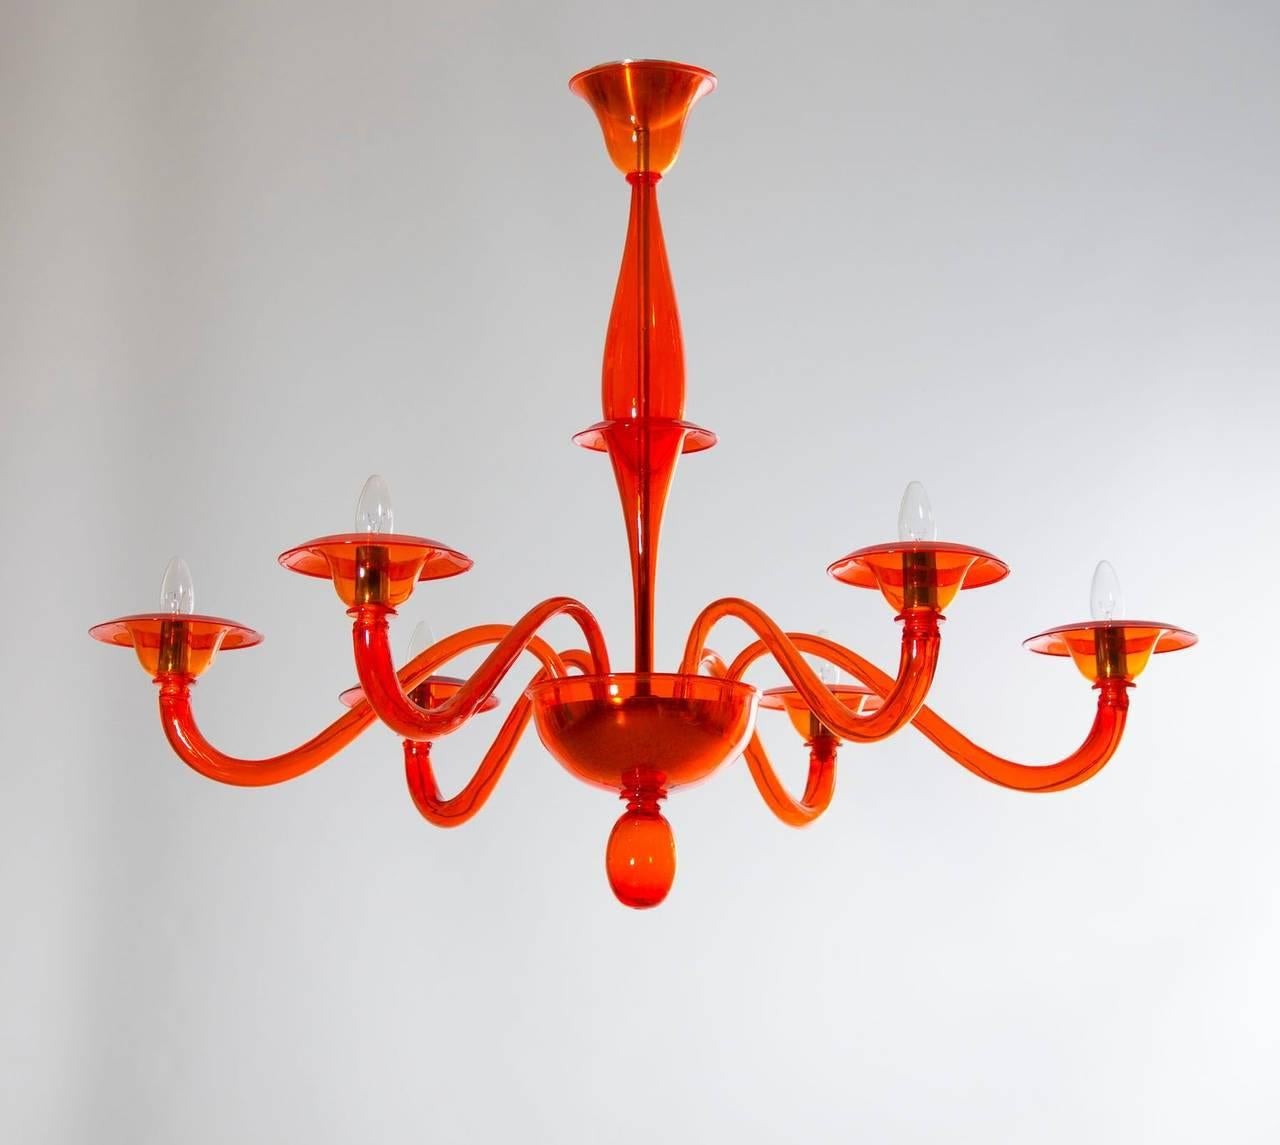 Customizable Murano Chandelier showcases in vibrant Orange Contemporary Italy.
A Customizable Venetian Chandelier in Vibrant Orange, a Contemporary Masterpiece of Murano Glass.
This captivating chandelier, crafted in the vibrant hue of orange,